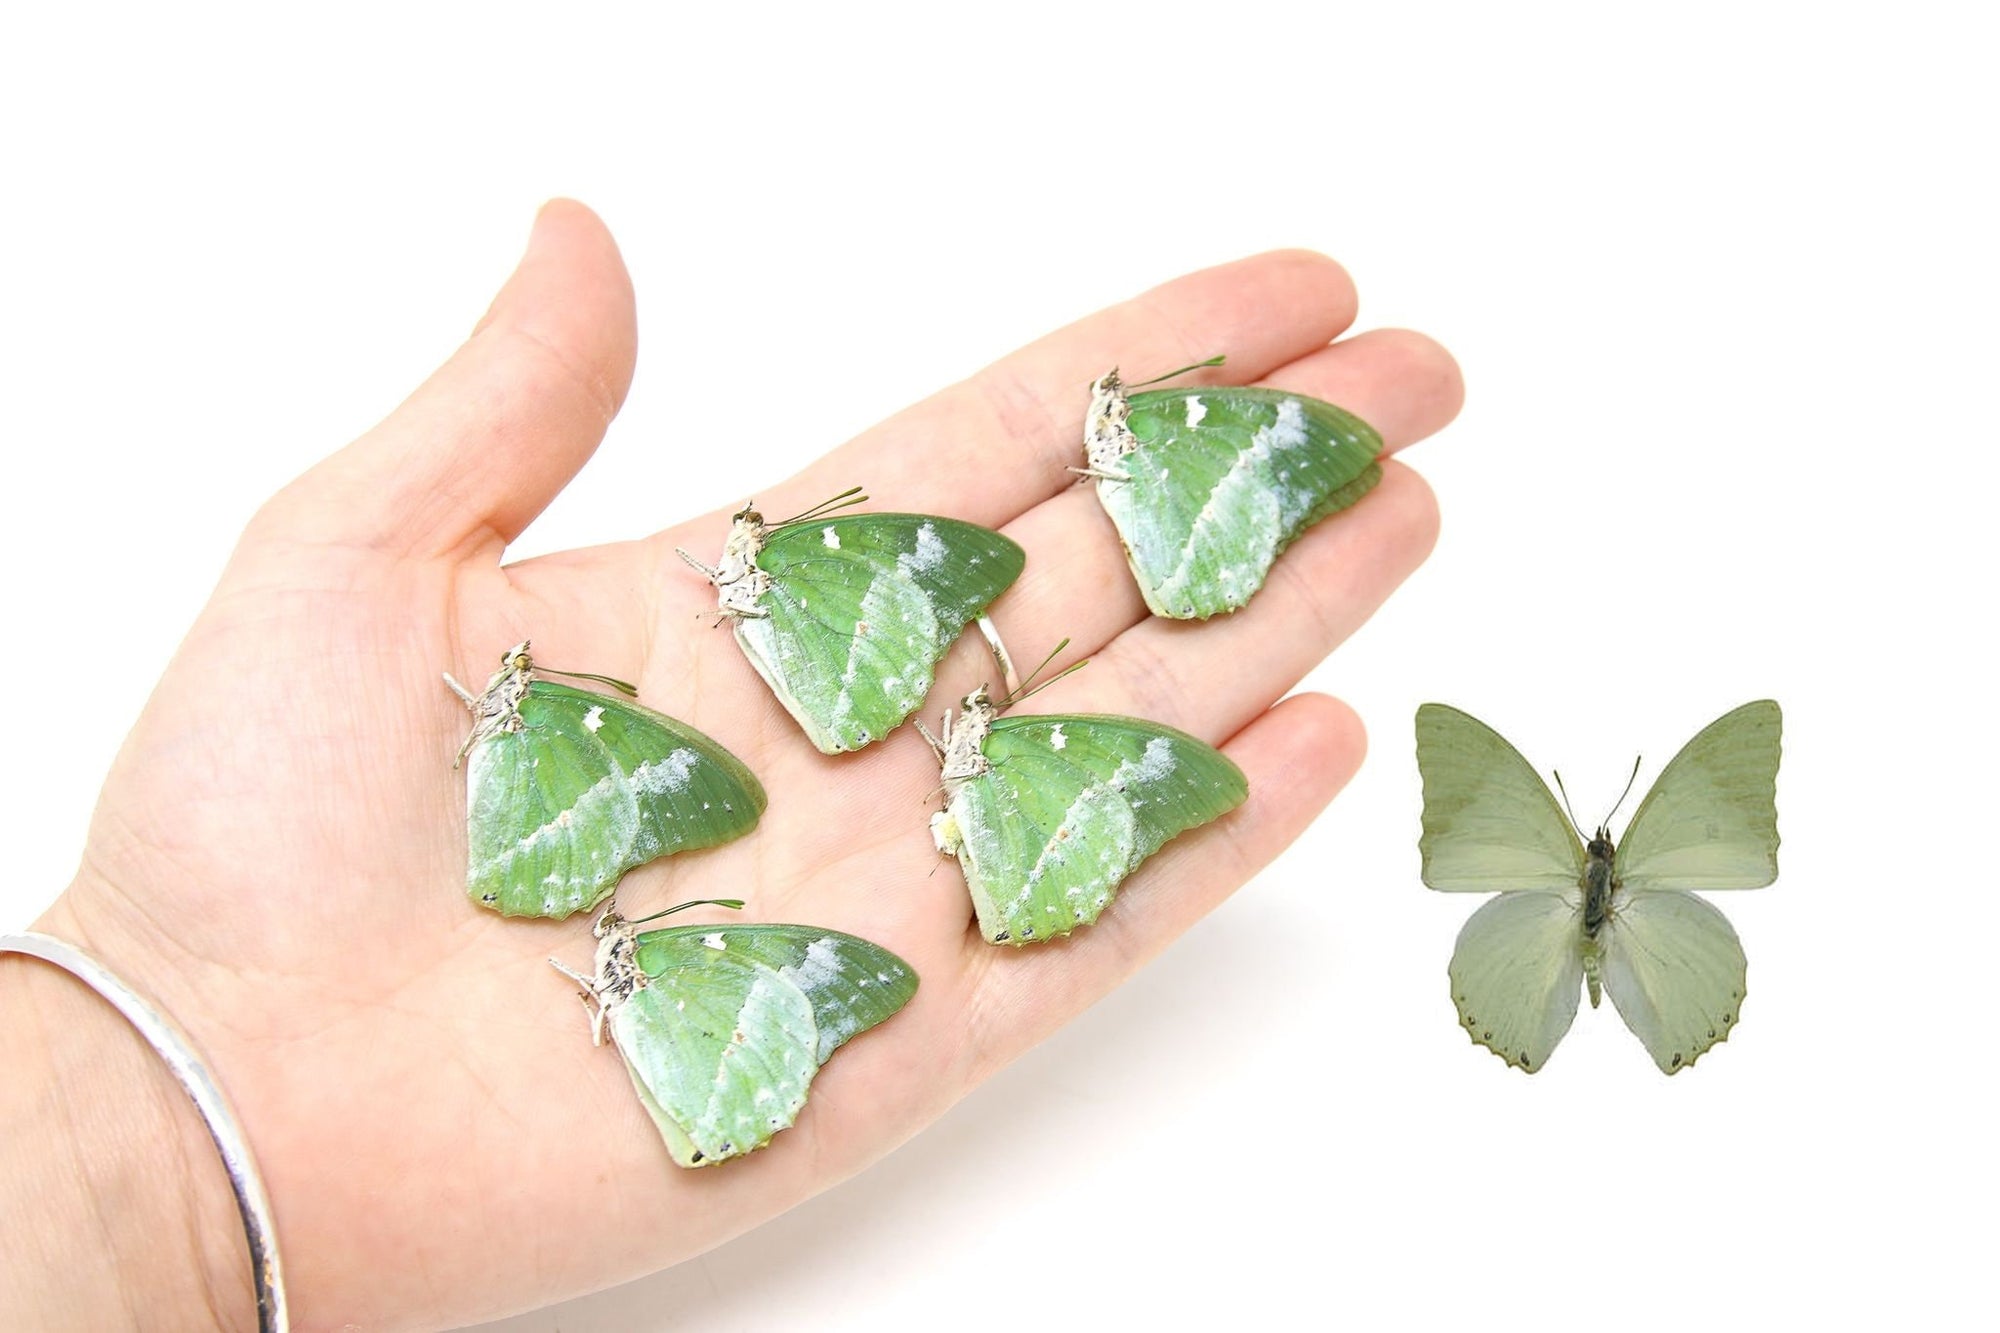 Five (5) Charaxes subornatus, Ornate Green A1 Real Dry-Preserved Butterflies, Unmounted Entomology Taxidermy Specimens